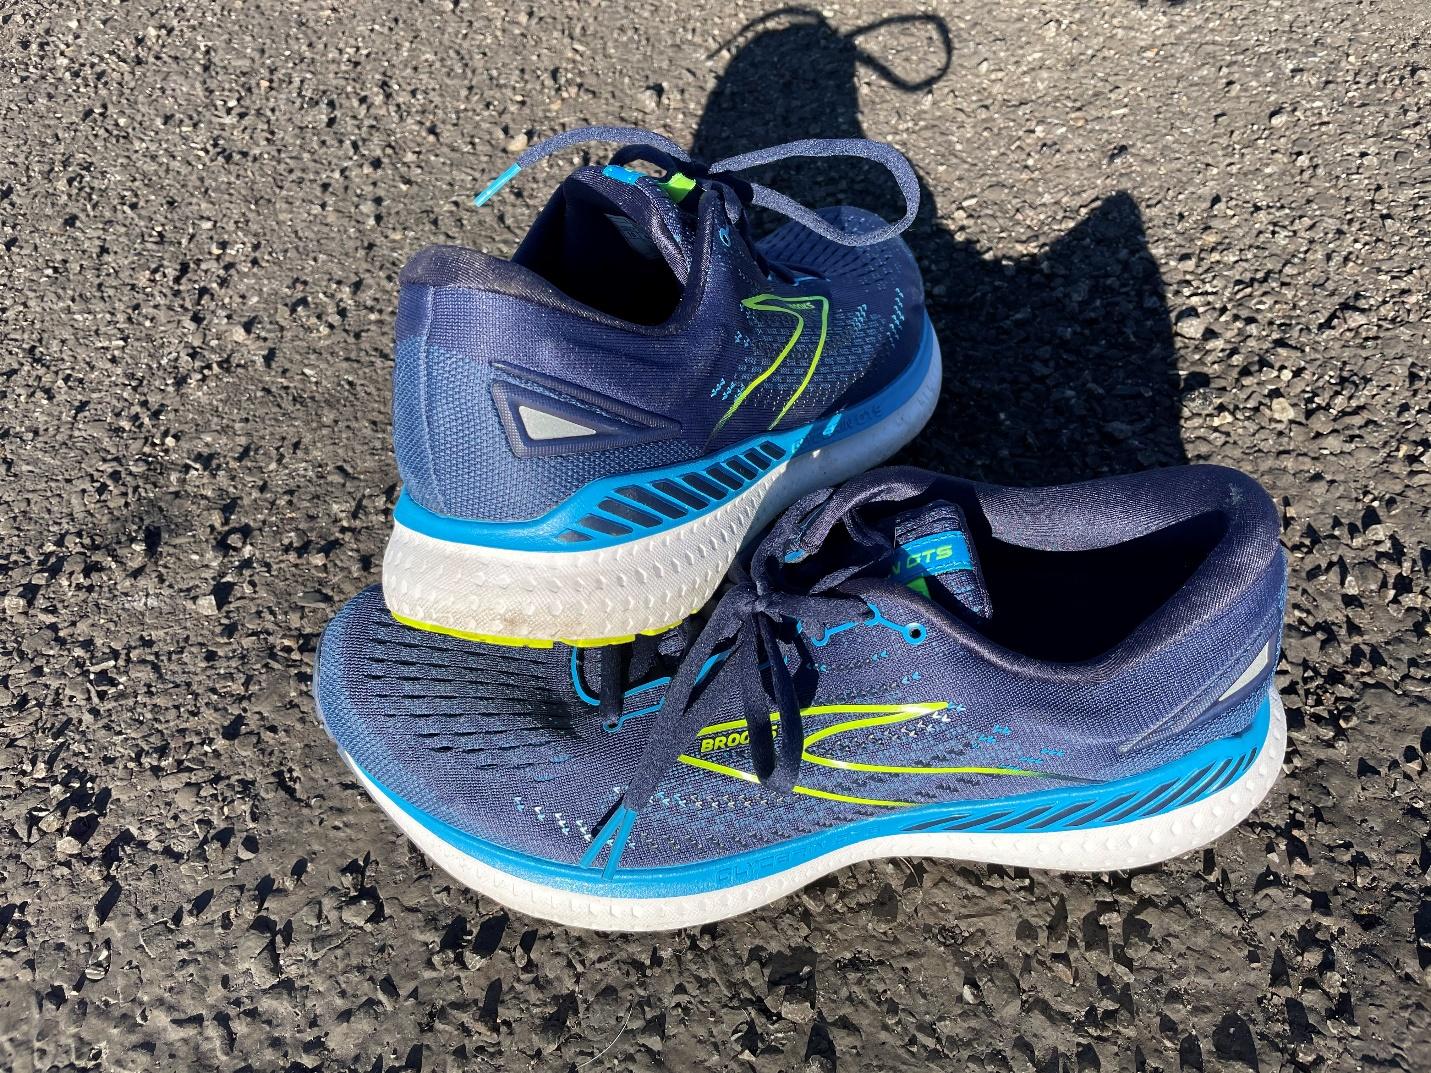 REVIEW: Brooks Glycerin 19 (GTS) - Running shoe - Read here! [VIDEO] -  Inspiration